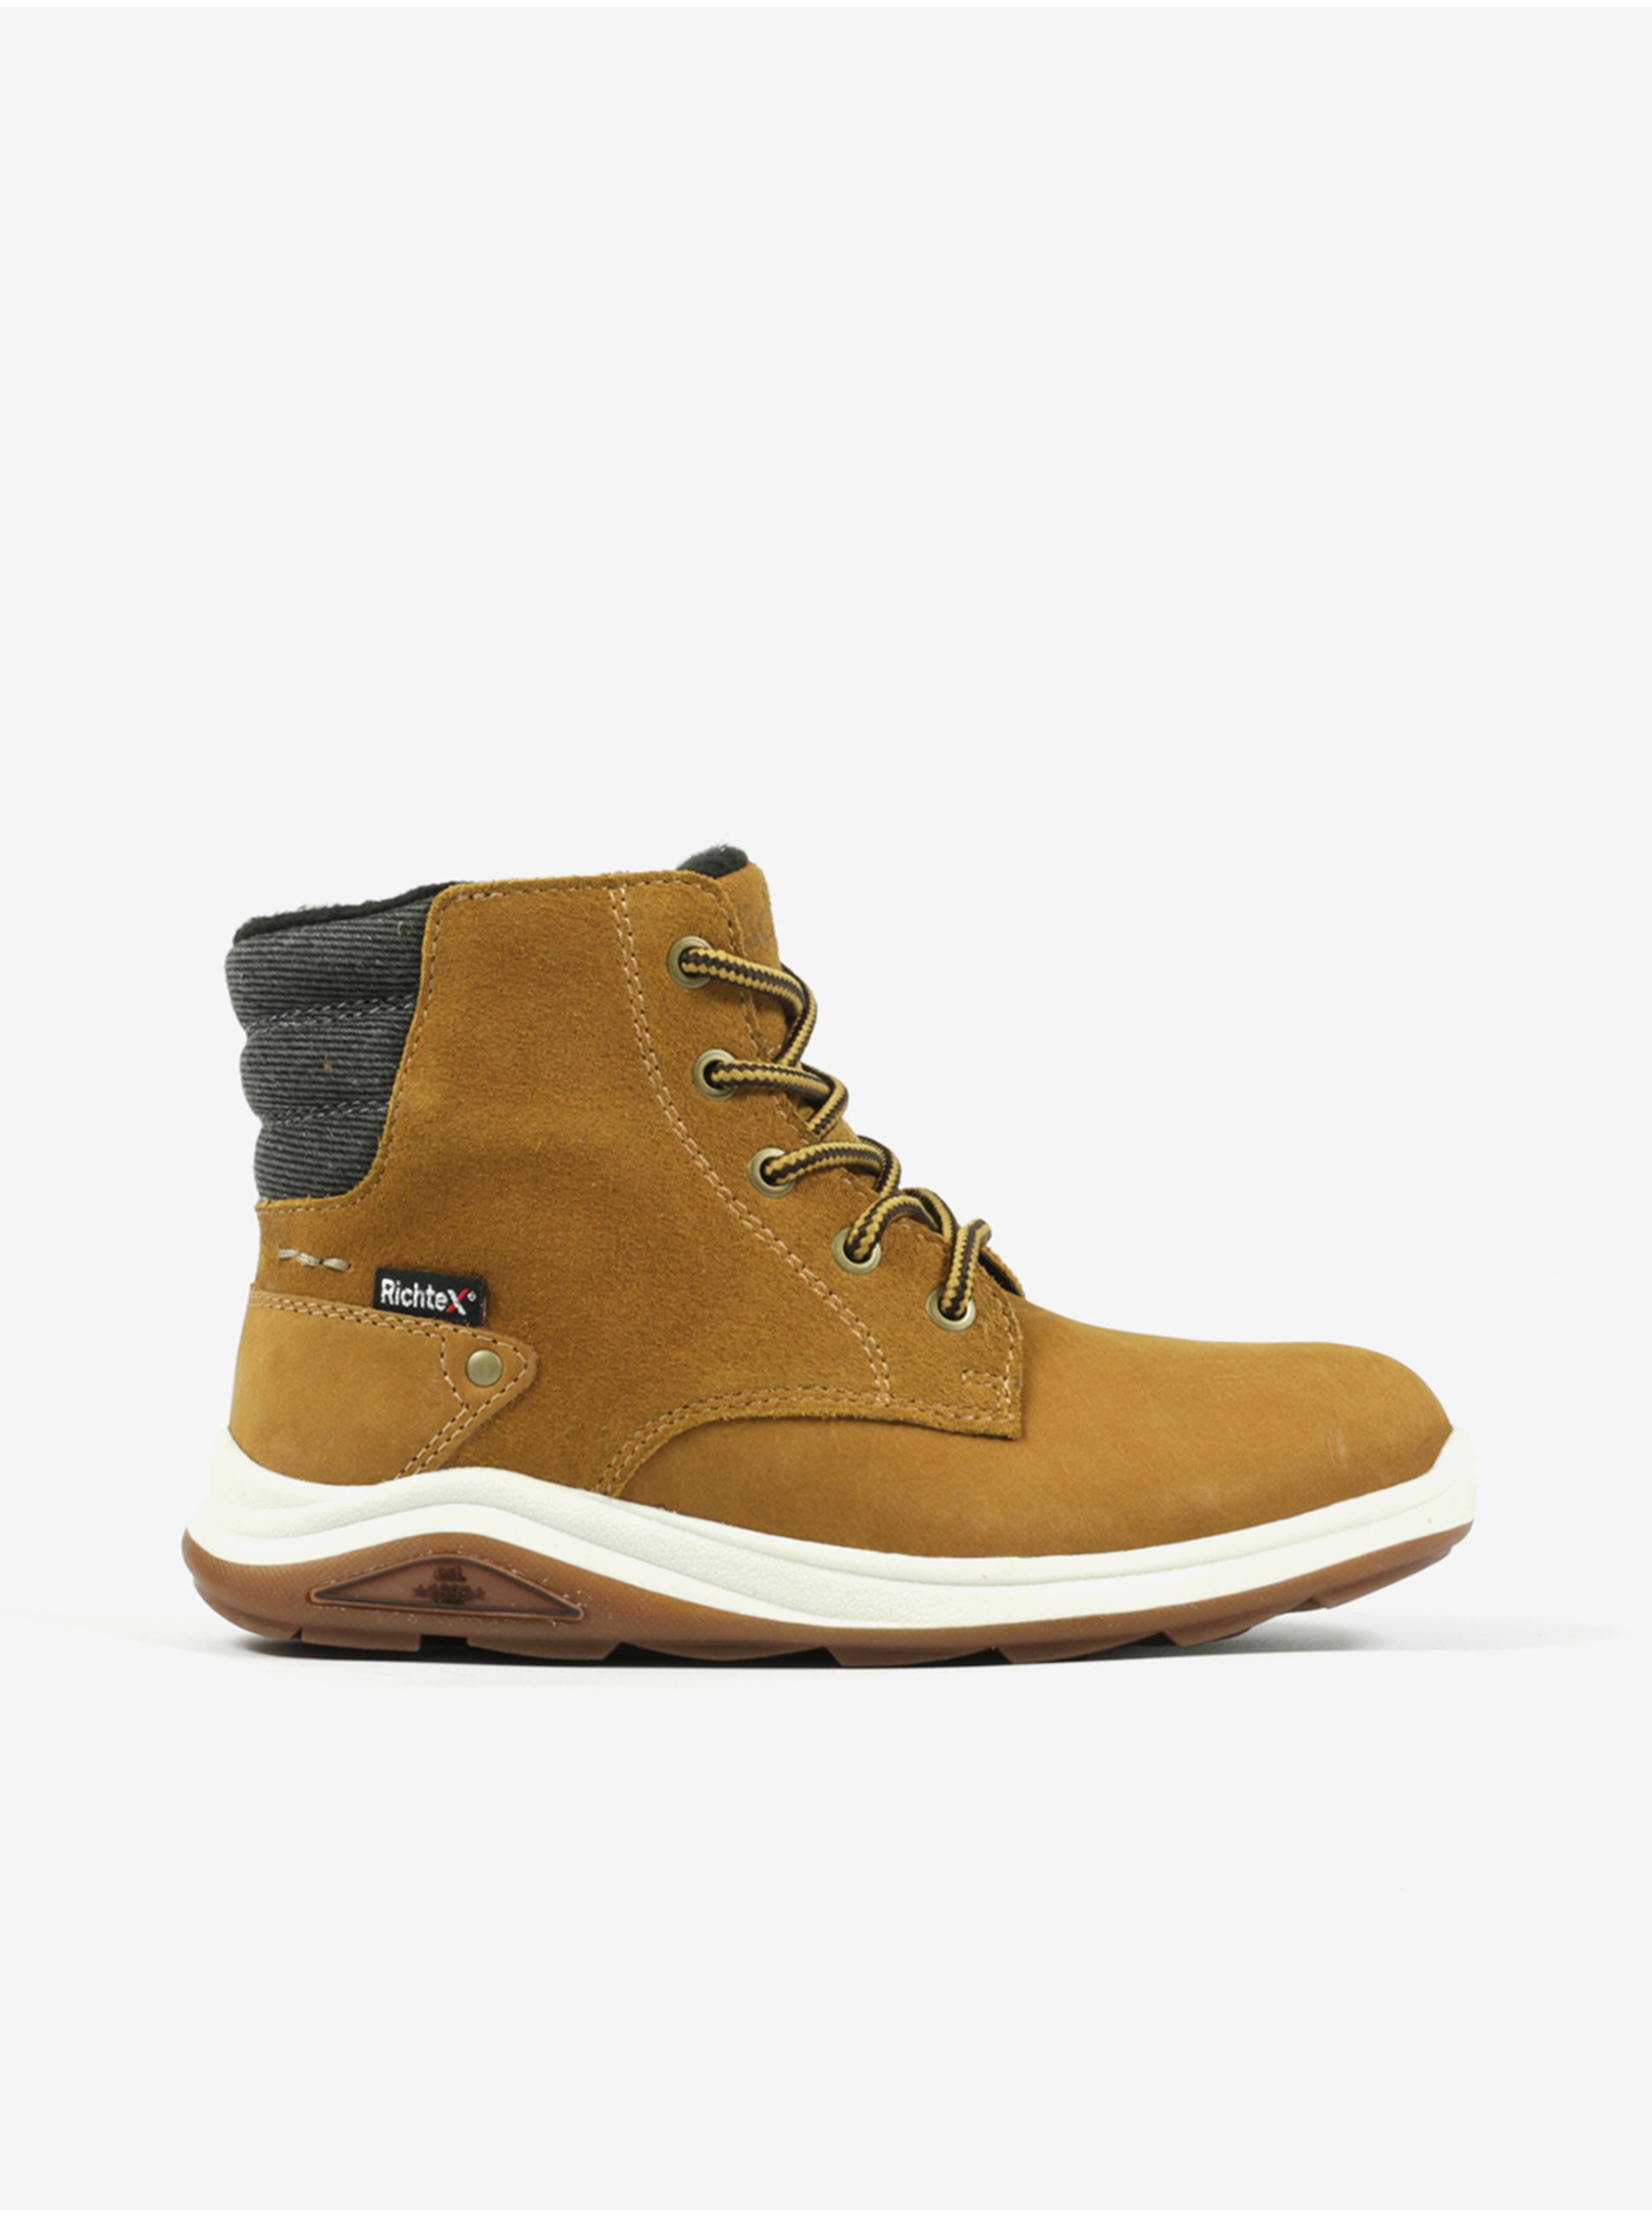 Brown Boys Ankle Insulated Suede Boots Richter - Boys